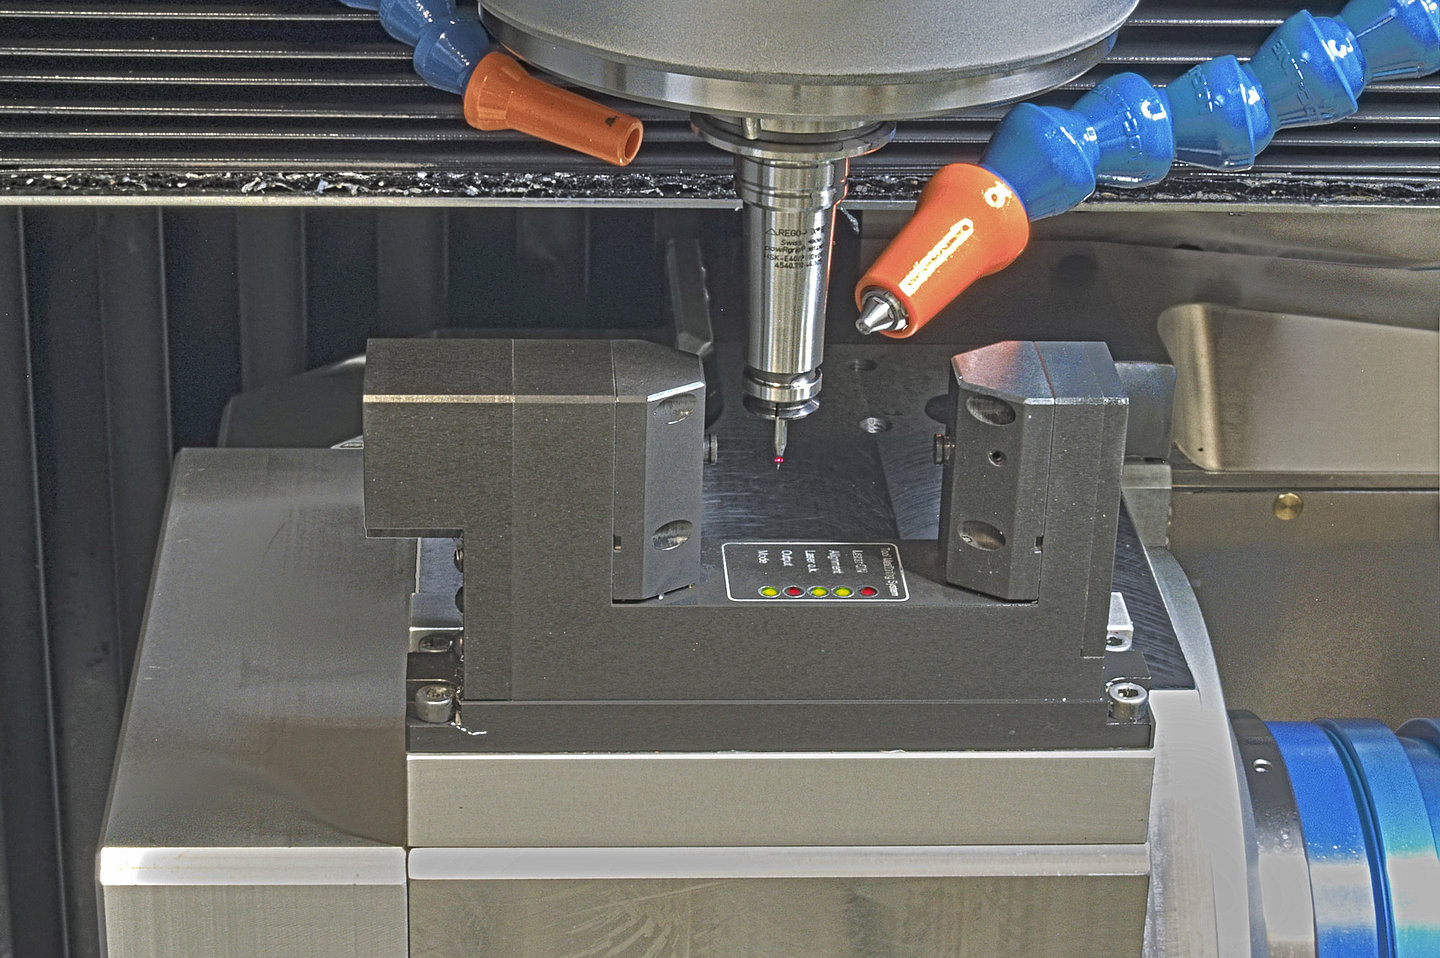 BLUM´s LaserControl NT measuring system enables W Präzisionstechnik to measure microscopic tools with a diameter of just 30μm with high precision